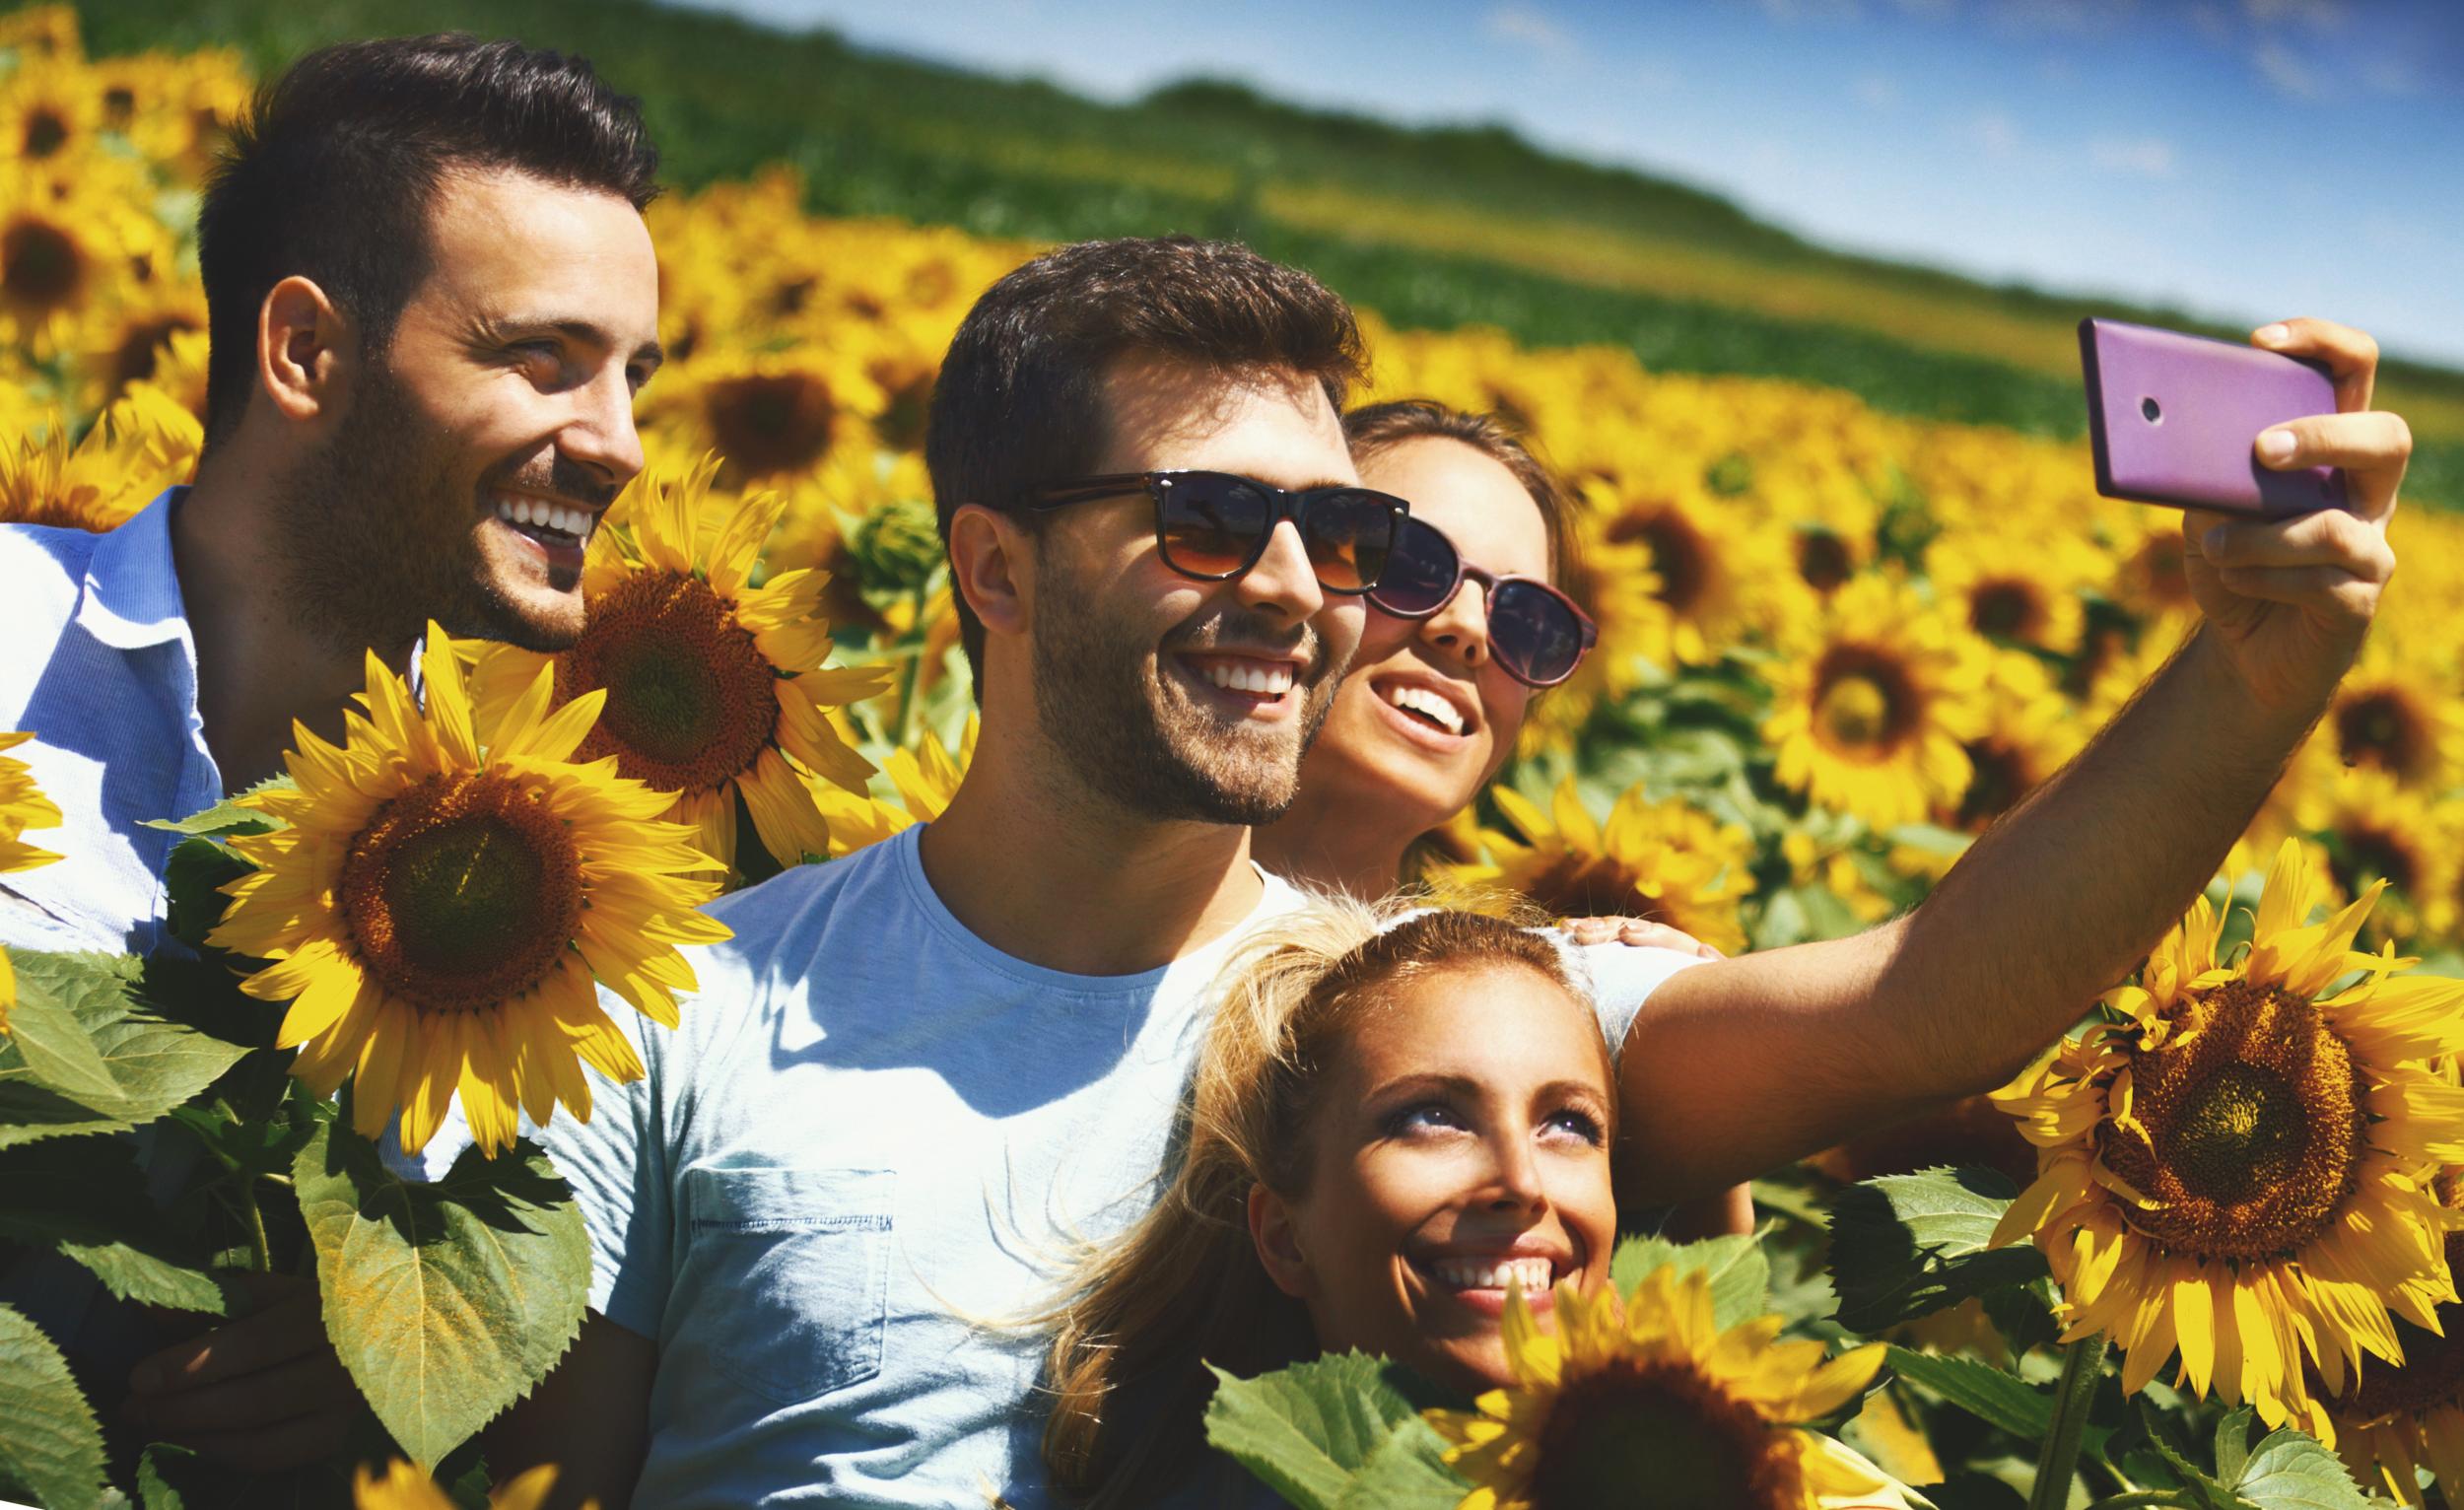 The enduring appeal of a sunflower selfie is irresistible